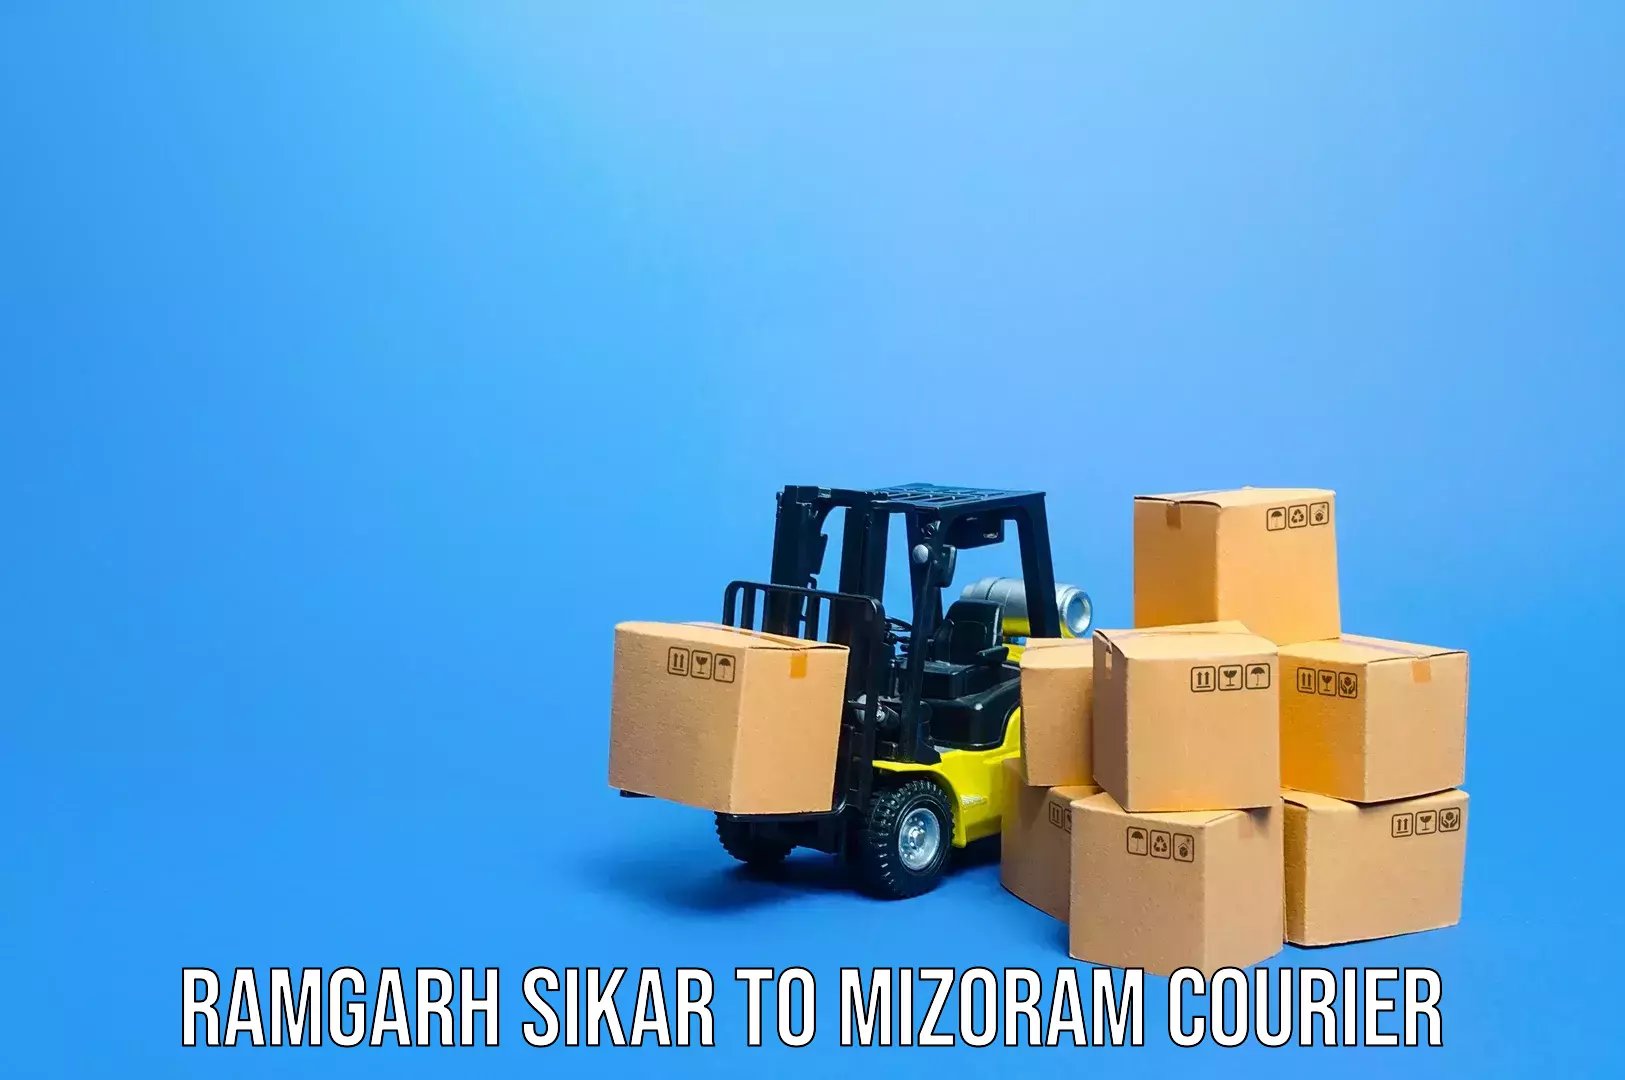 Luggage delivery app Ramgarh Sikar to Hnahthial